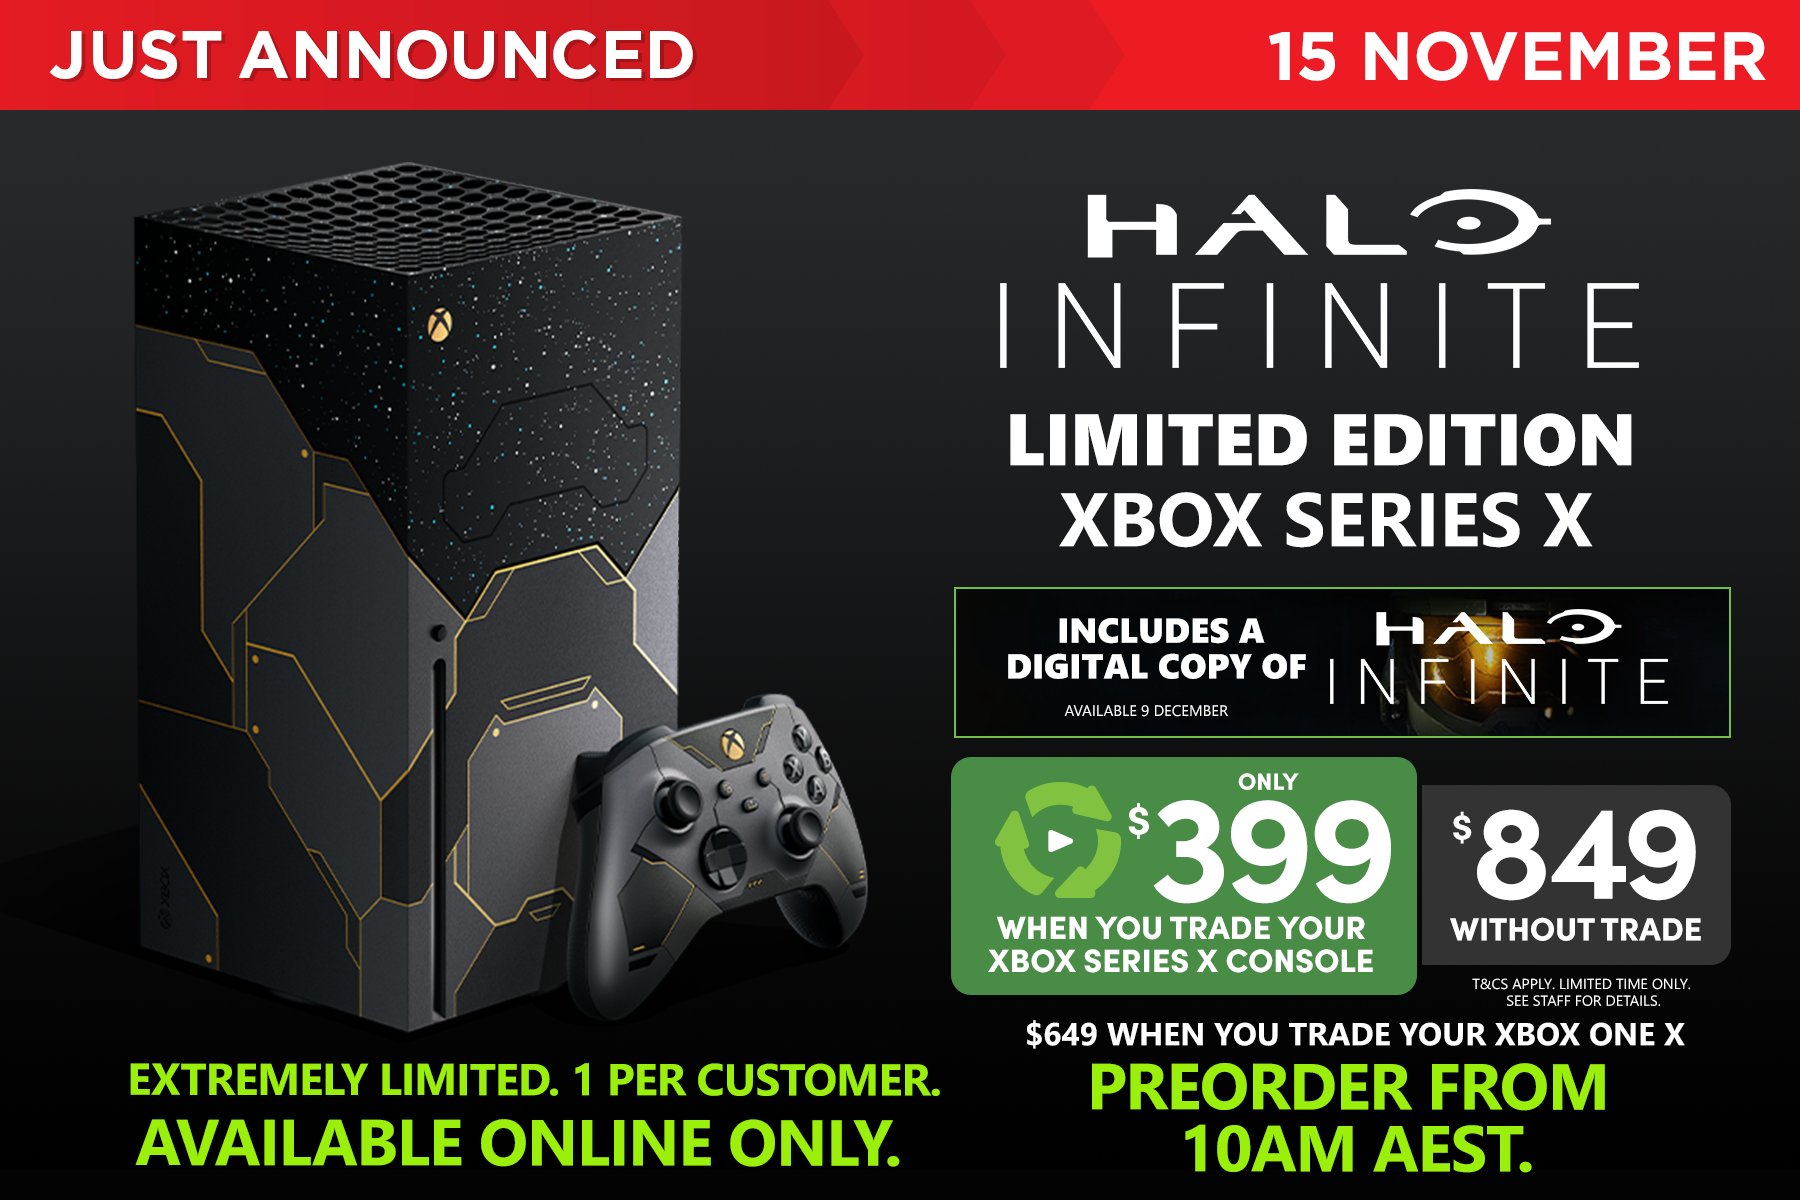 How to pre-order Halo Infinite Xbox Series X console and Elite